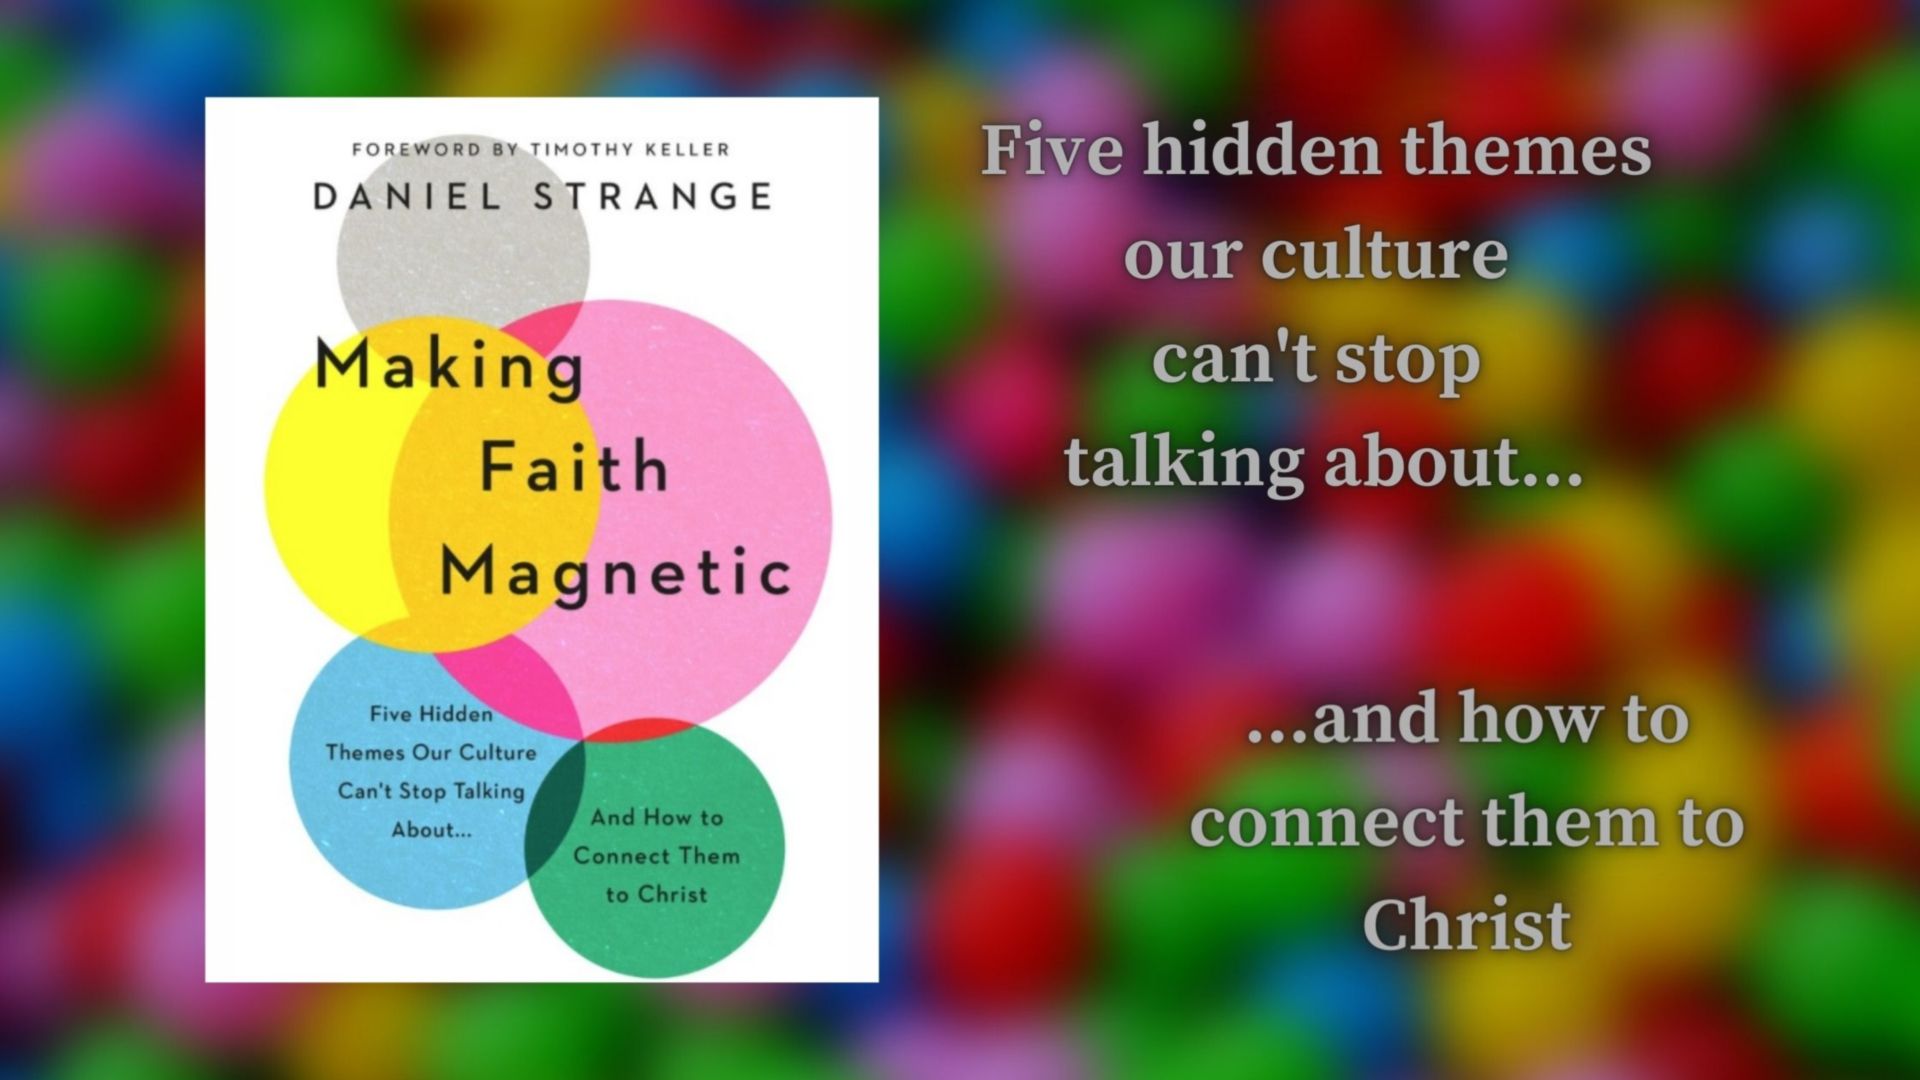 An Interview with Daniel Strange, author of 'Making Faith Magnetic'